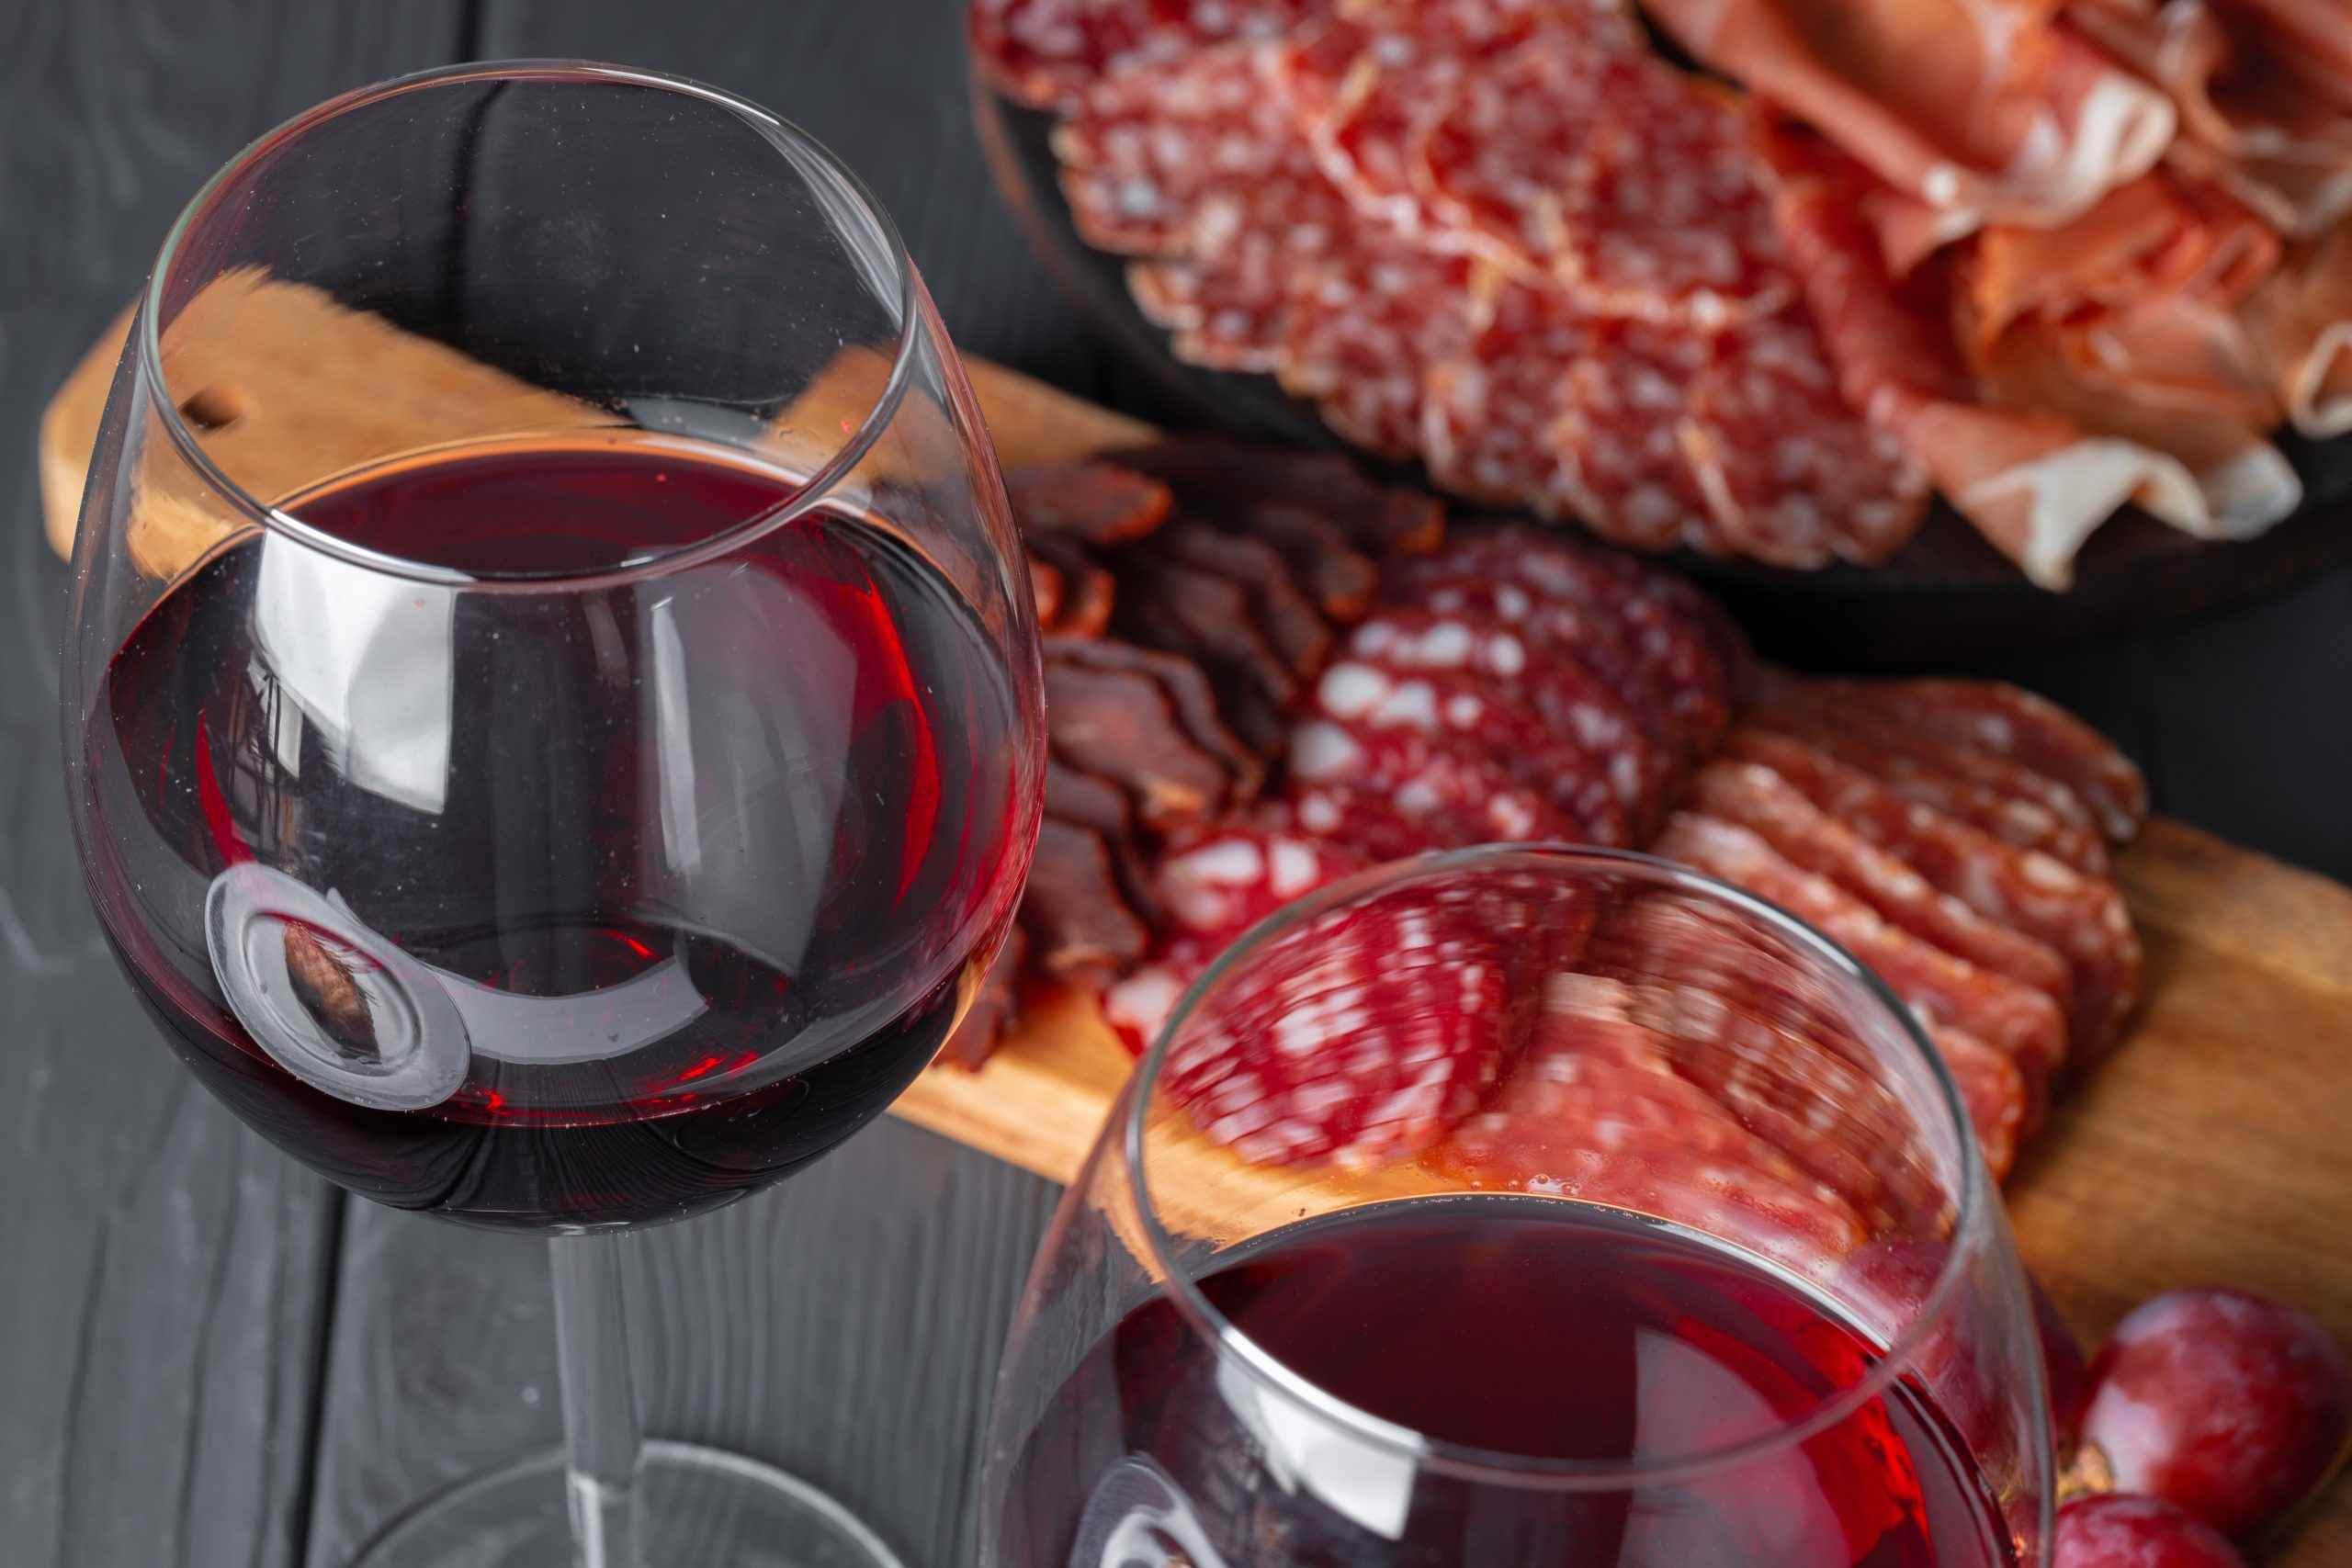 Wineglass with red wine and meat cuts board